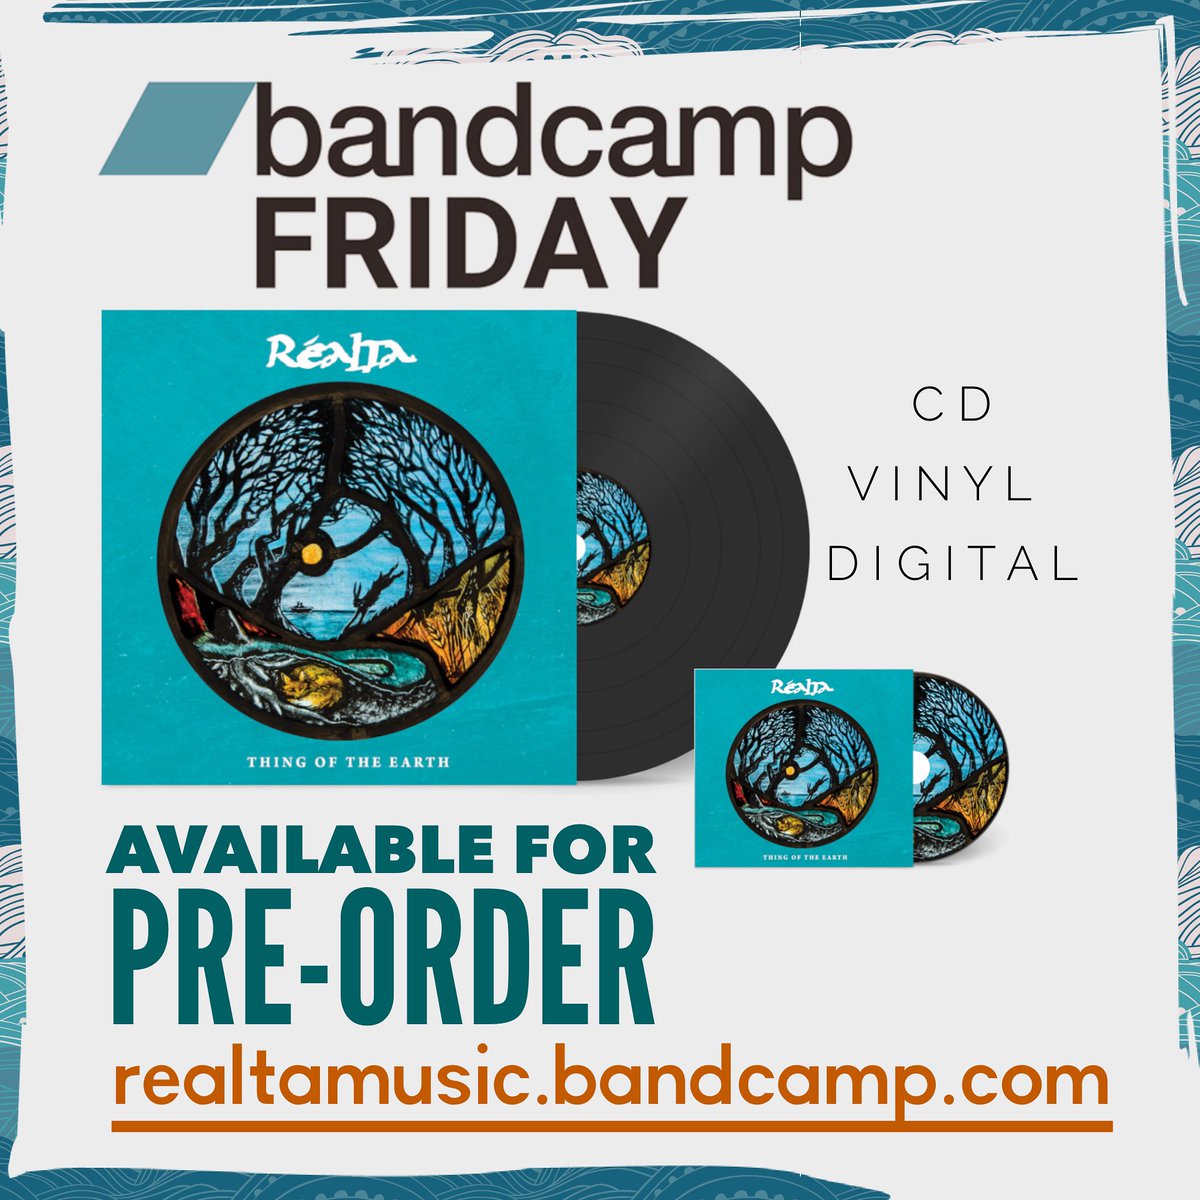 It’s #bandcampfriday and our new album Thing Of The Earth is available for pre-order on #CD #Vinyl and #digitaldownload ! 😎🎶🥳 realtamusic.bandcamp.com/album/thing-of… Support art and receive the album before general release! (estimated shipping mid Sept)